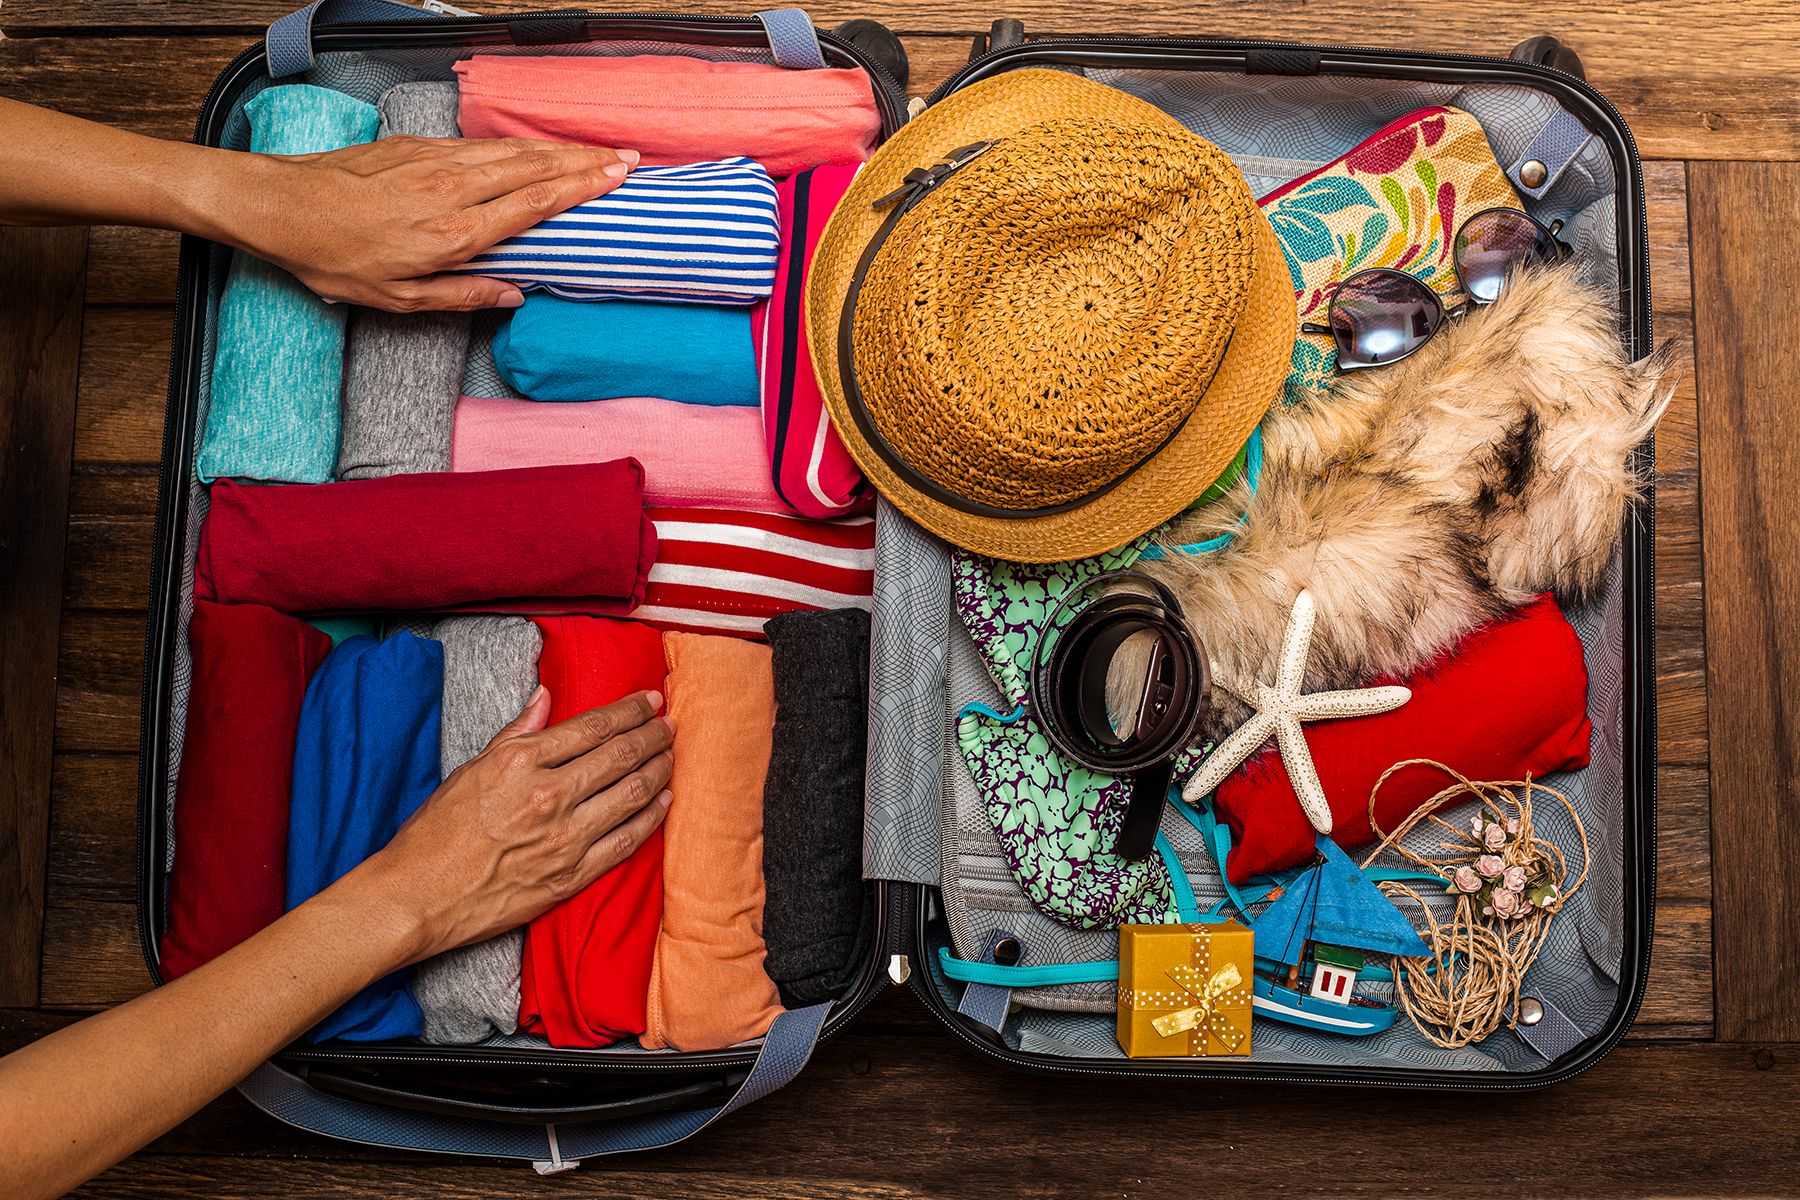 Start Your Vacation Stress-Free With These Carry-On Packing Tips